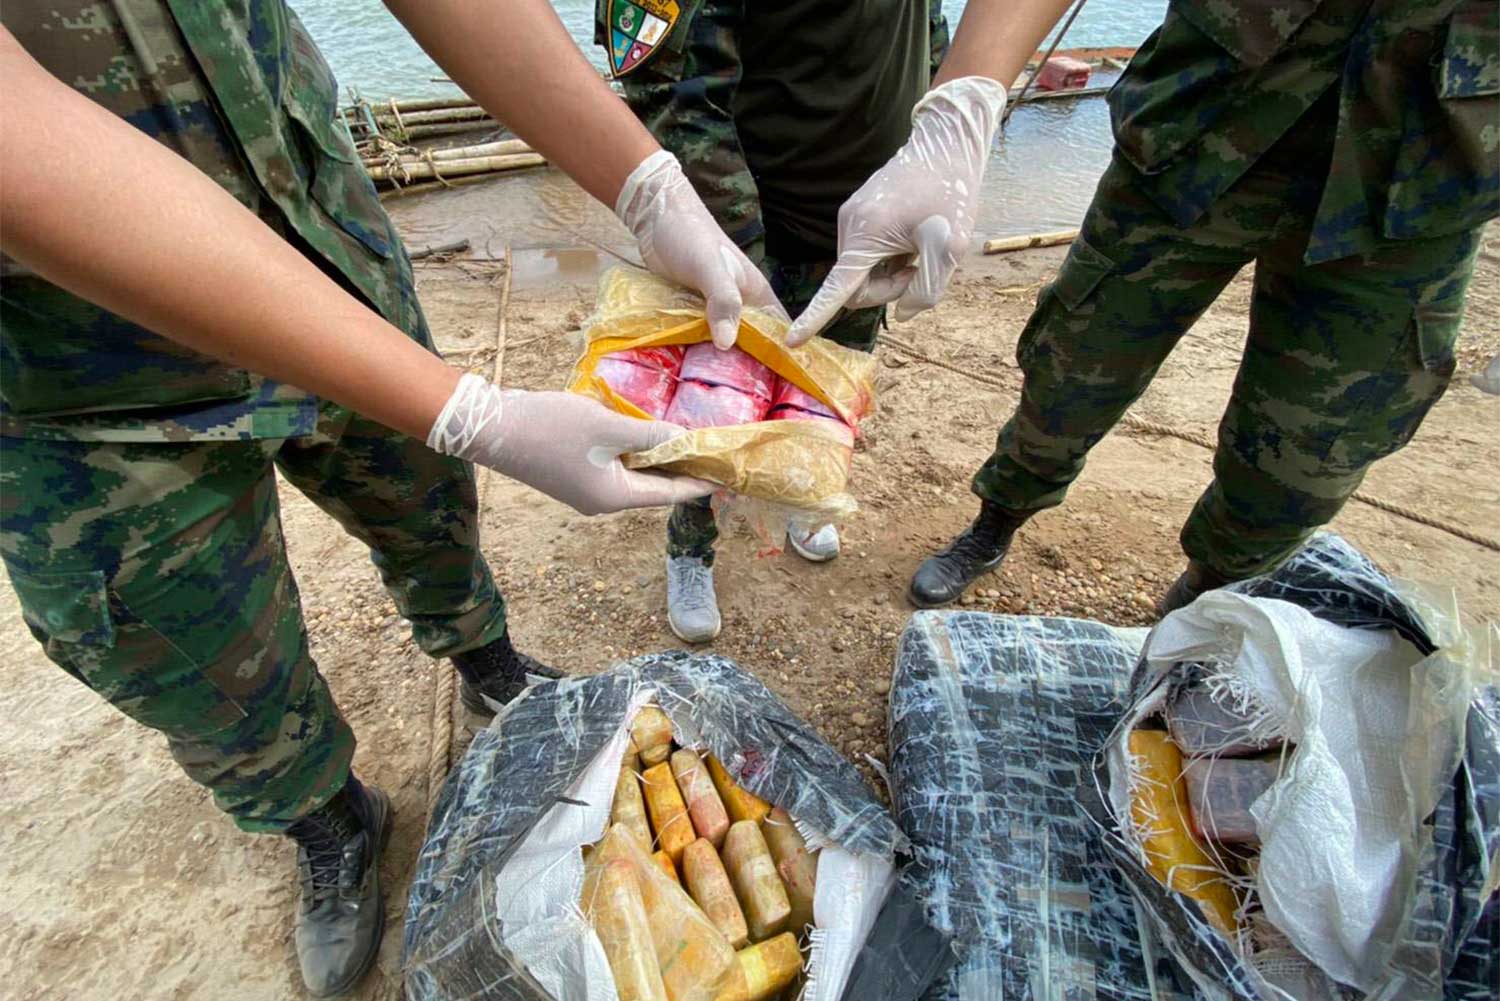 Army Rangers Seize 258,000 Meth Tablets, Smugglers Fled